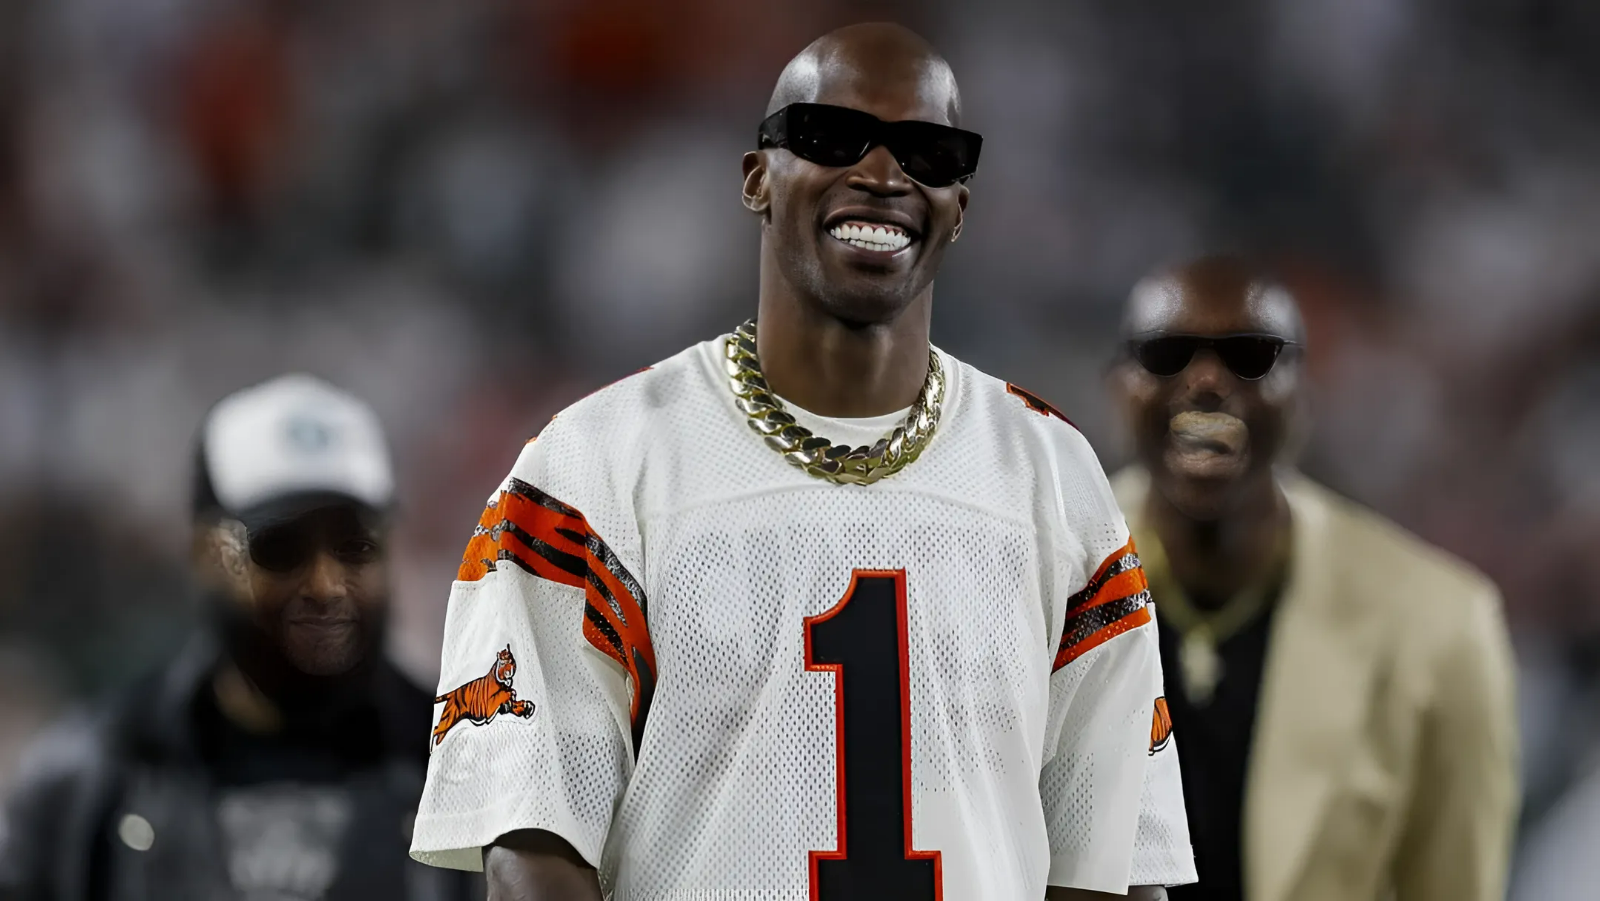 Chad Johnson weighs in on Tee Higgins' future with Bengals